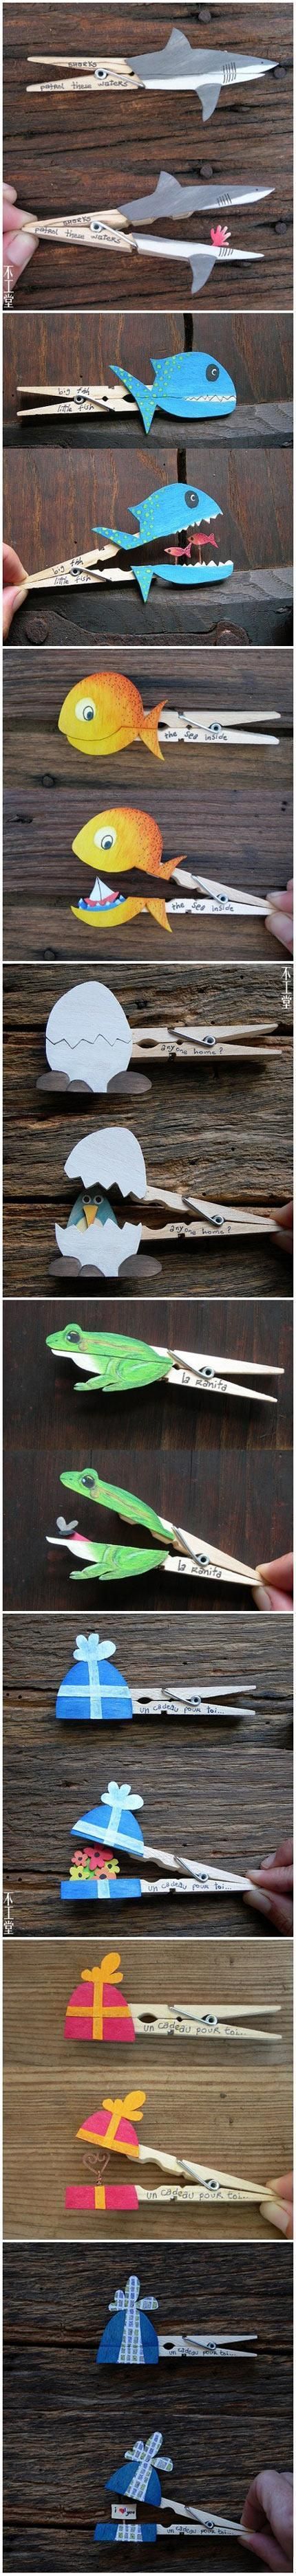 Fun With Clothespins…